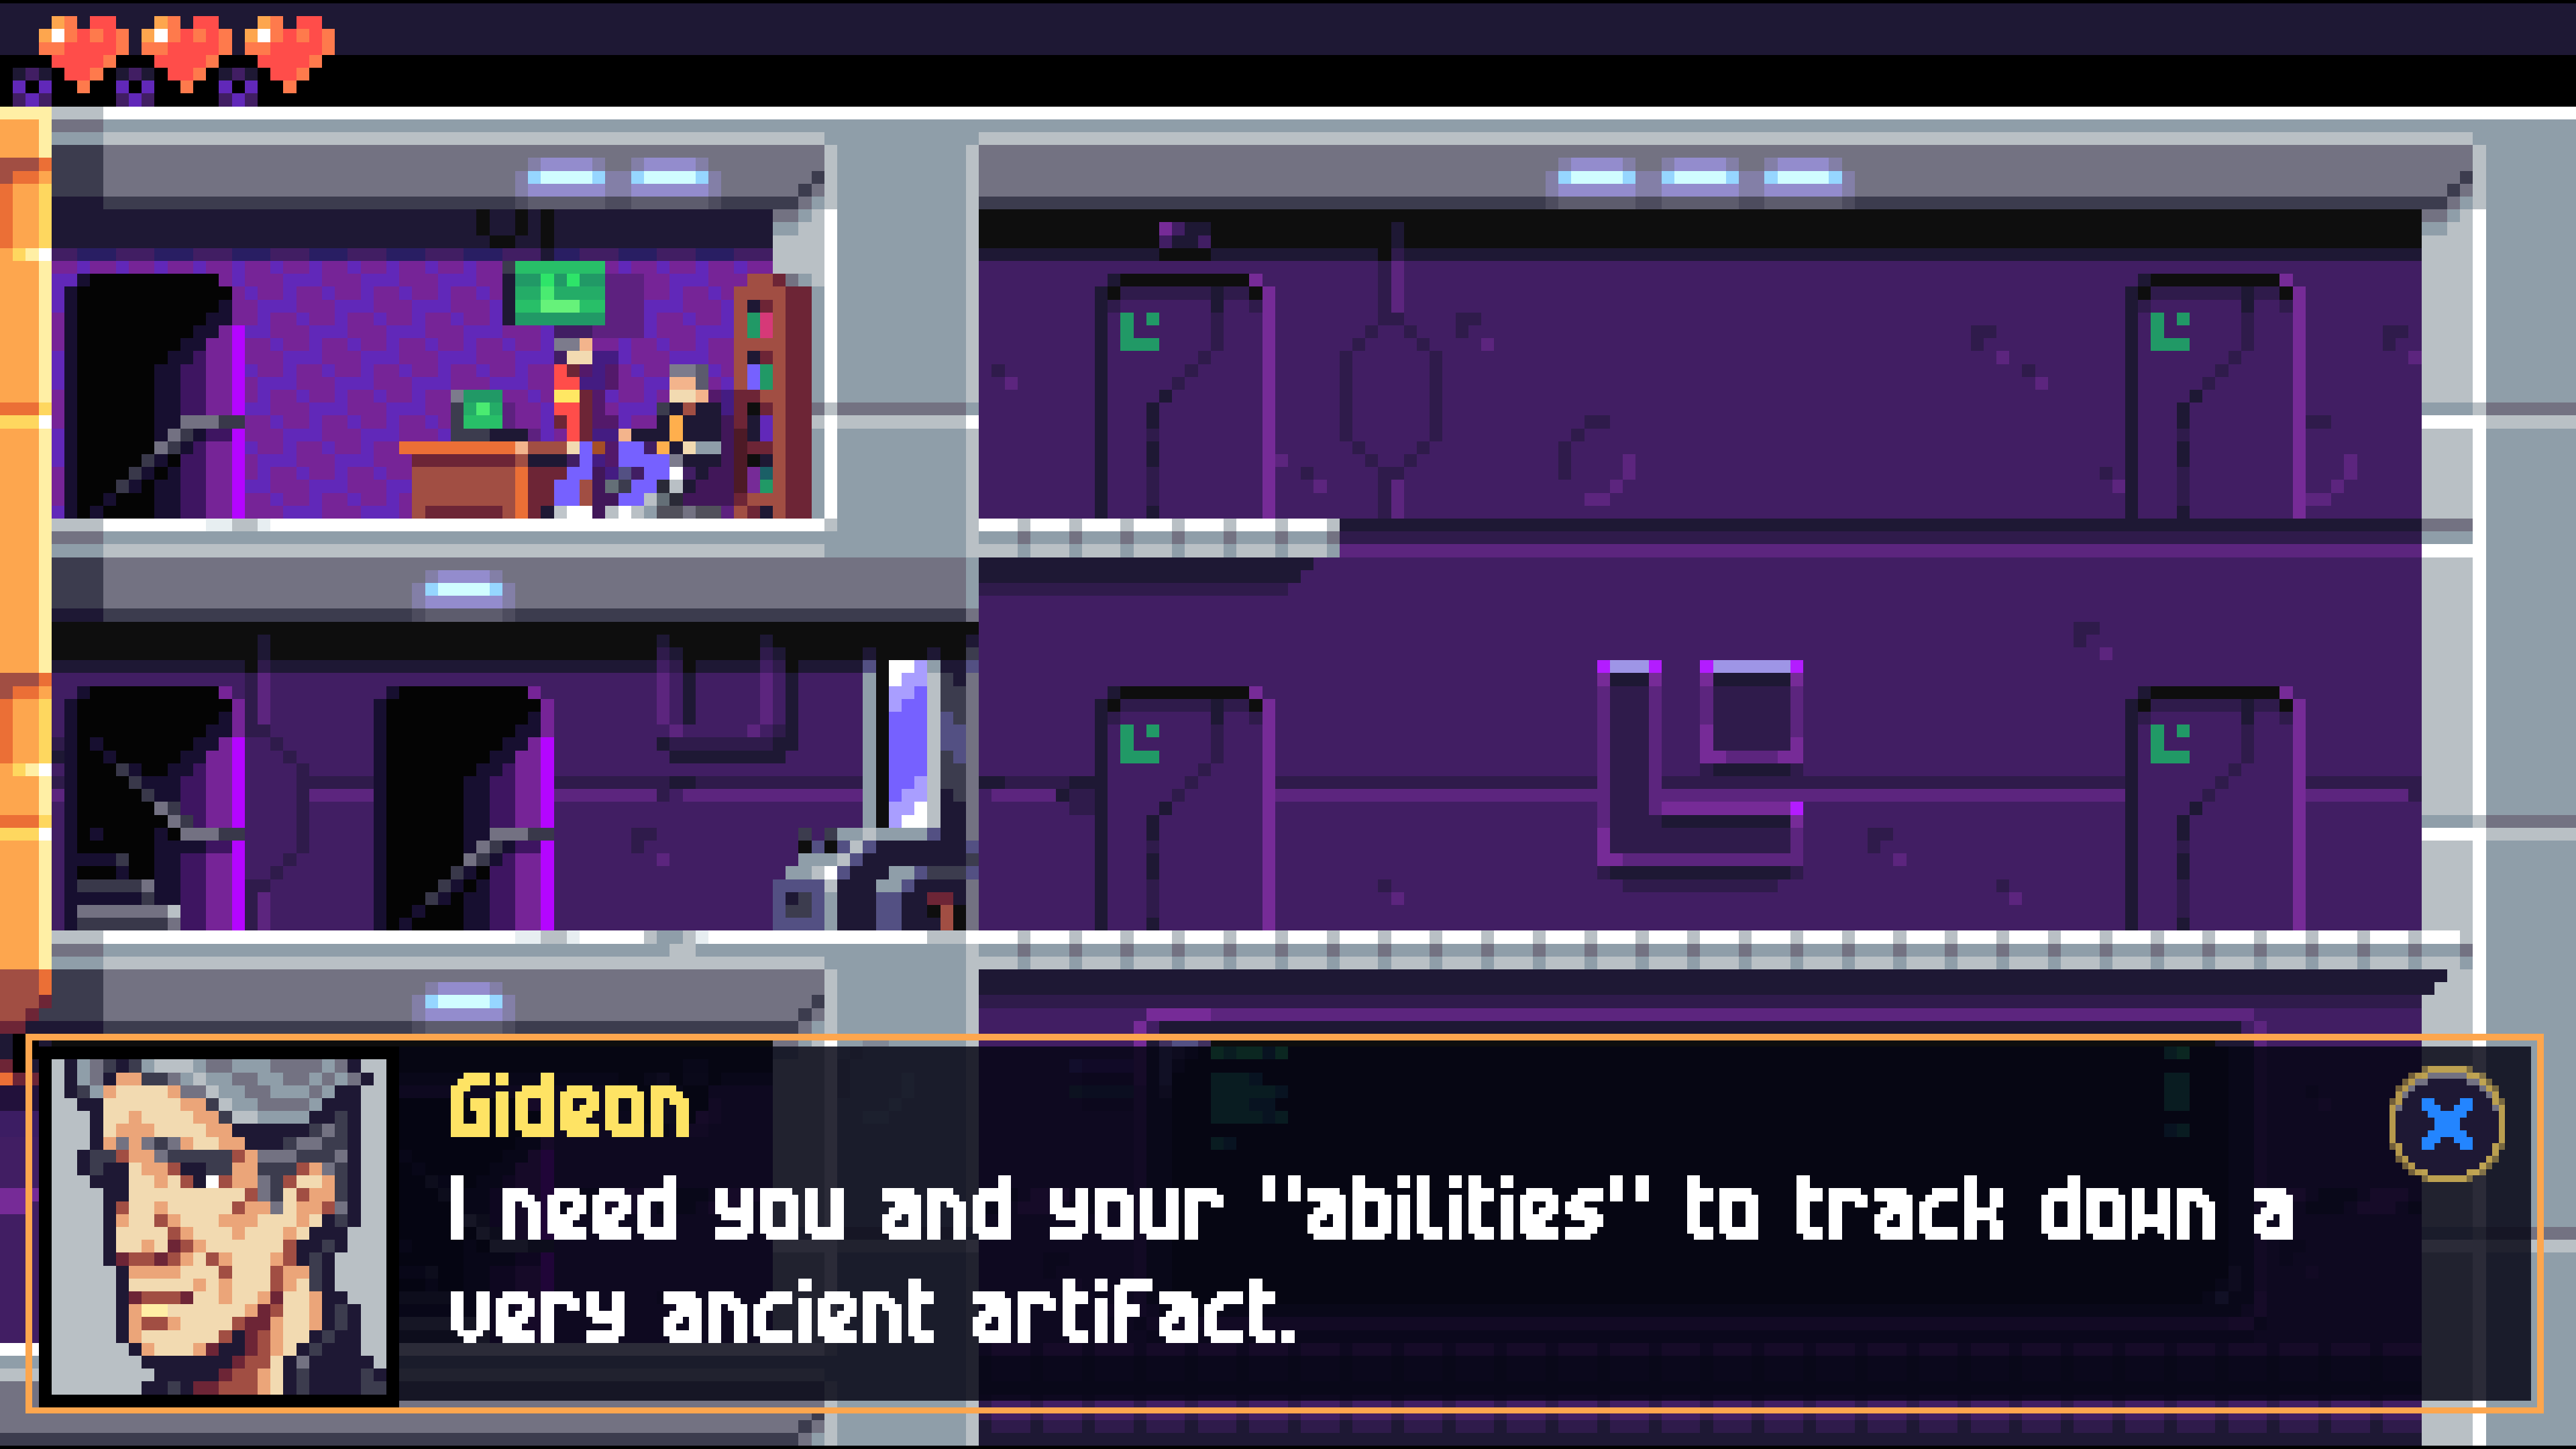 2 characters in conversation in an office room in top left platform in a lavel in Lunark. A stairway to the left leads to the lower level. Dialogue at the bootom of the image shows a character called Gideon talking. The word read: "I need you and your "abilities" to track down a very ancient artifact."